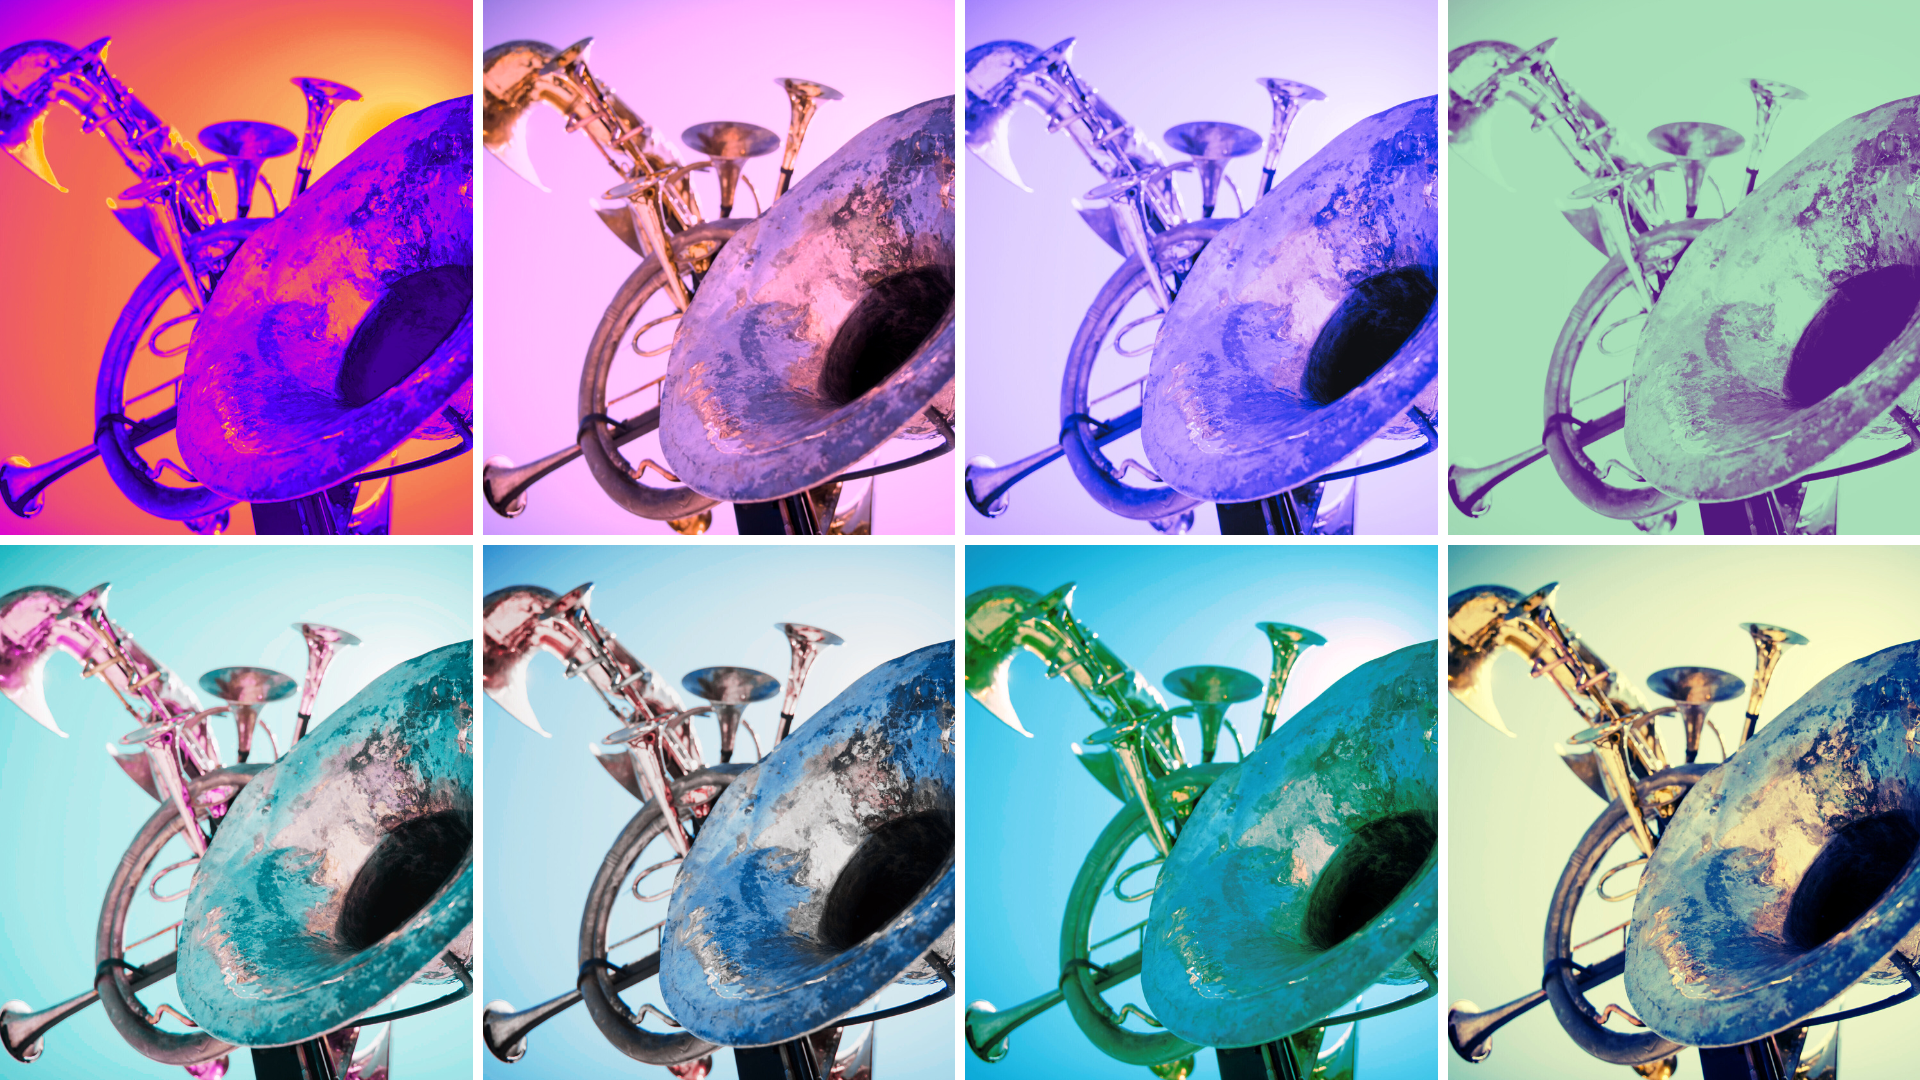 A pop art-colored grid of 8 images of an assortment of brass instruments melded together